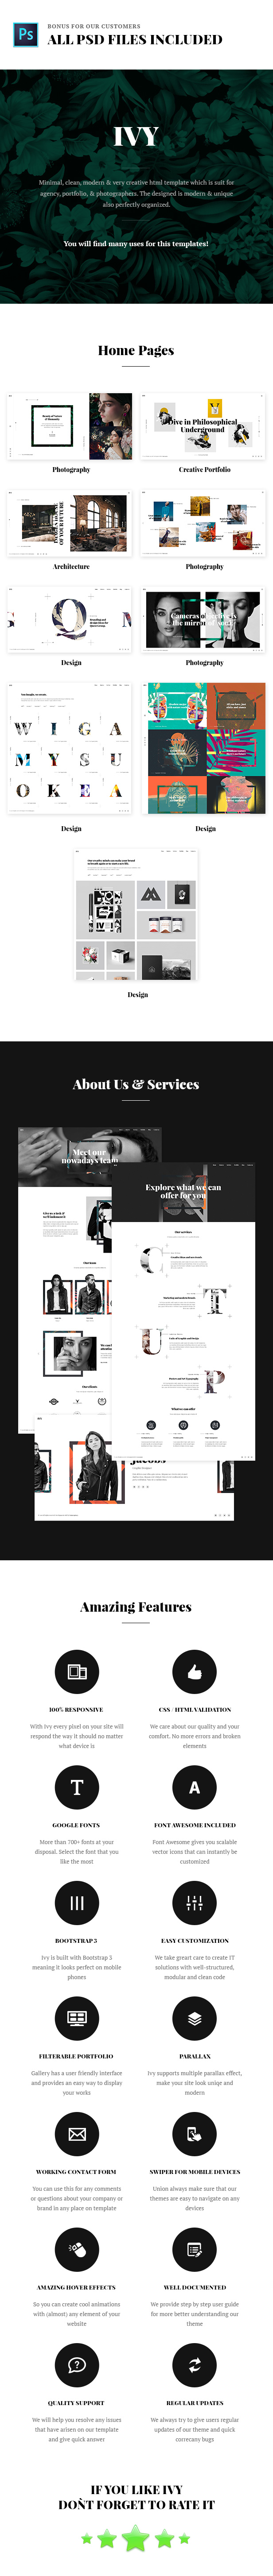 Ivy - Uniqe and Creative Photography/Portfolio/Agency HTML Template - 1